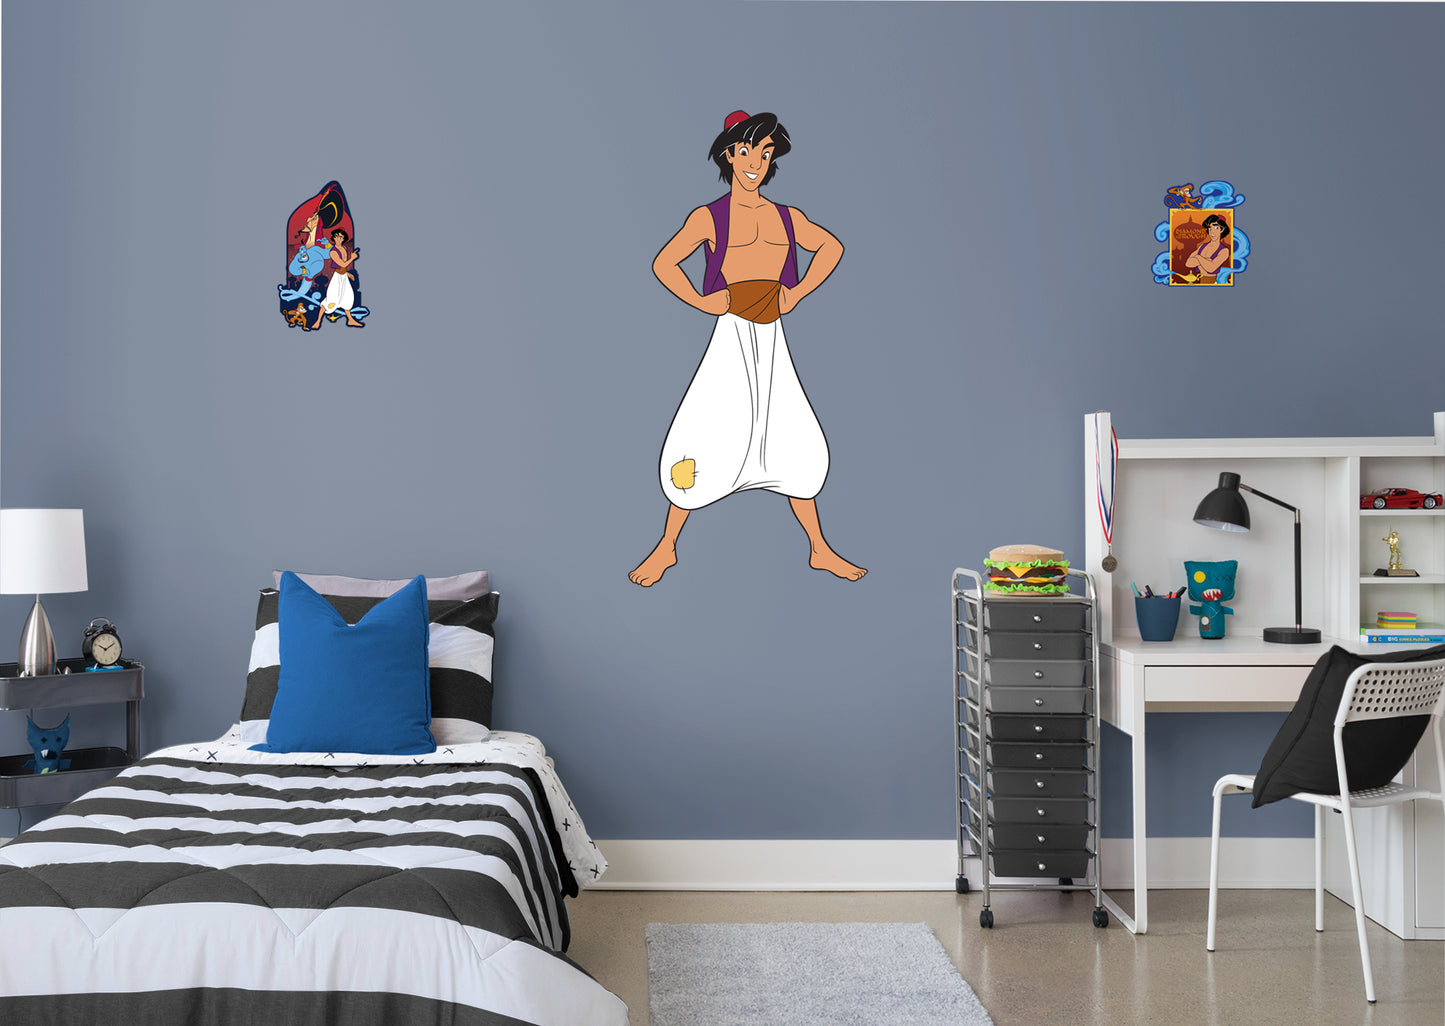 Aladdin: Aladdin RealBigs        - Officially Licensed Disney Removable Wall   Adhesive Decal